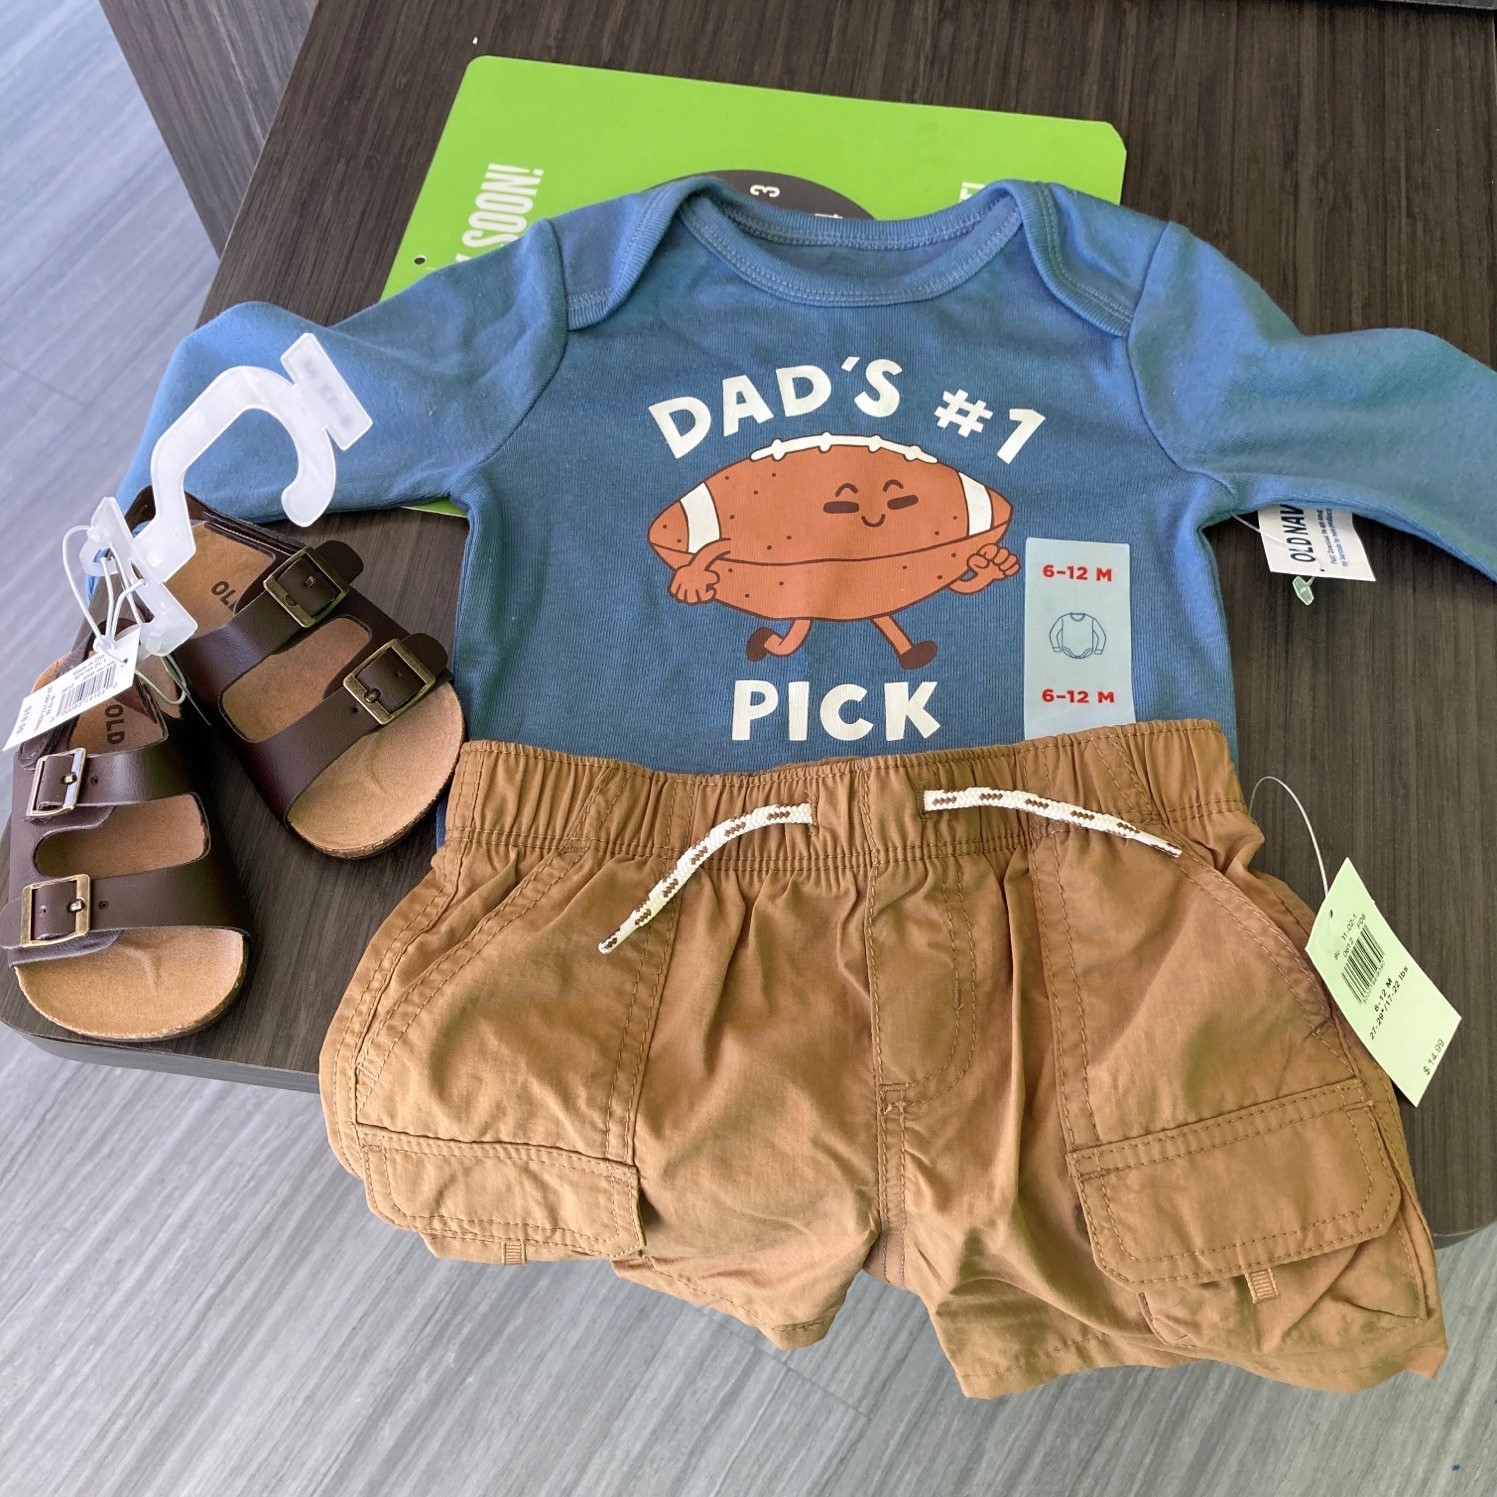 EXR customer appreciation baby gift. Baby outfit, shoes, and a card